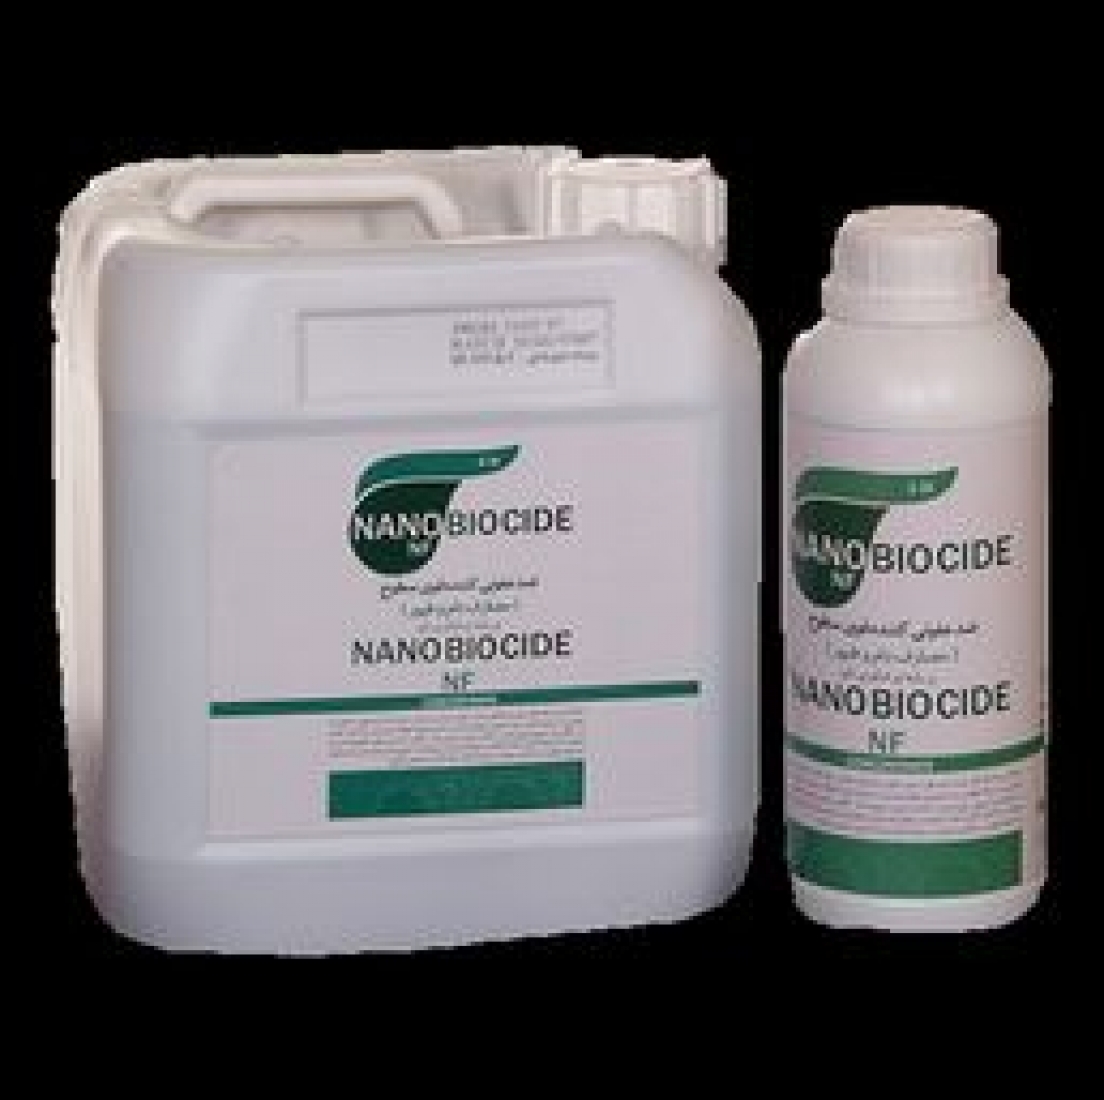 Disinfectants for surface, hall floor, walls and holdings 